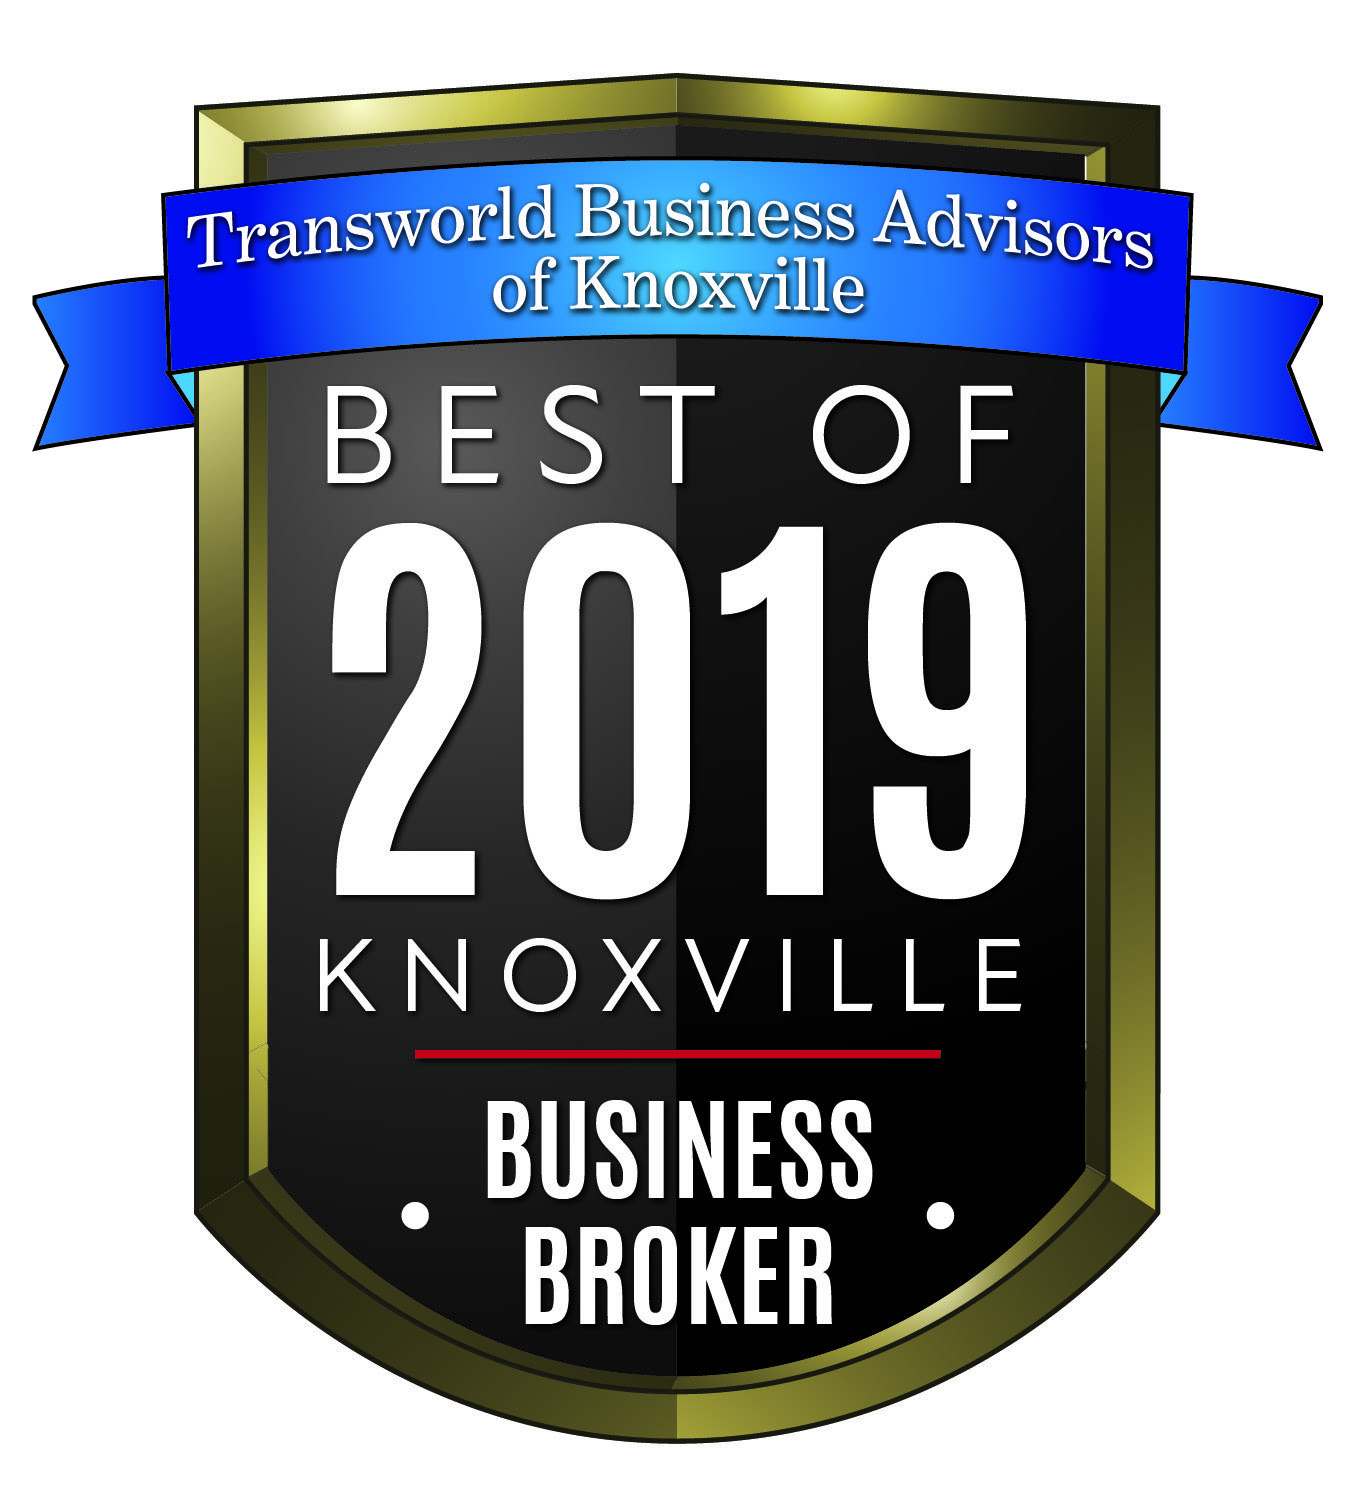 Best Business Brokers Knoxville Transworld